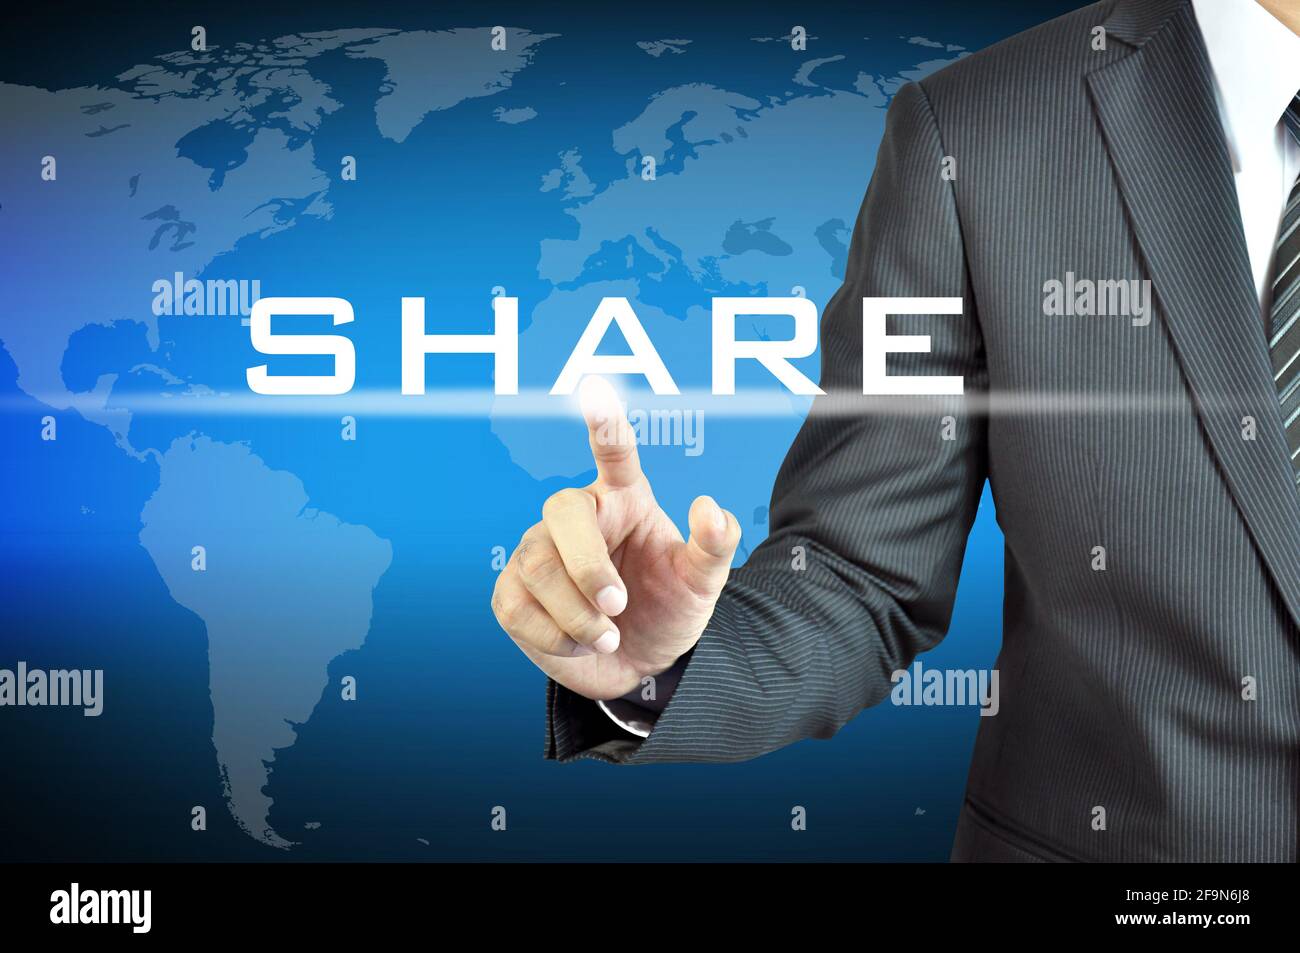 Businessman hand touching SHARE word on virtual screen - online business & marketing concept Stock Photo